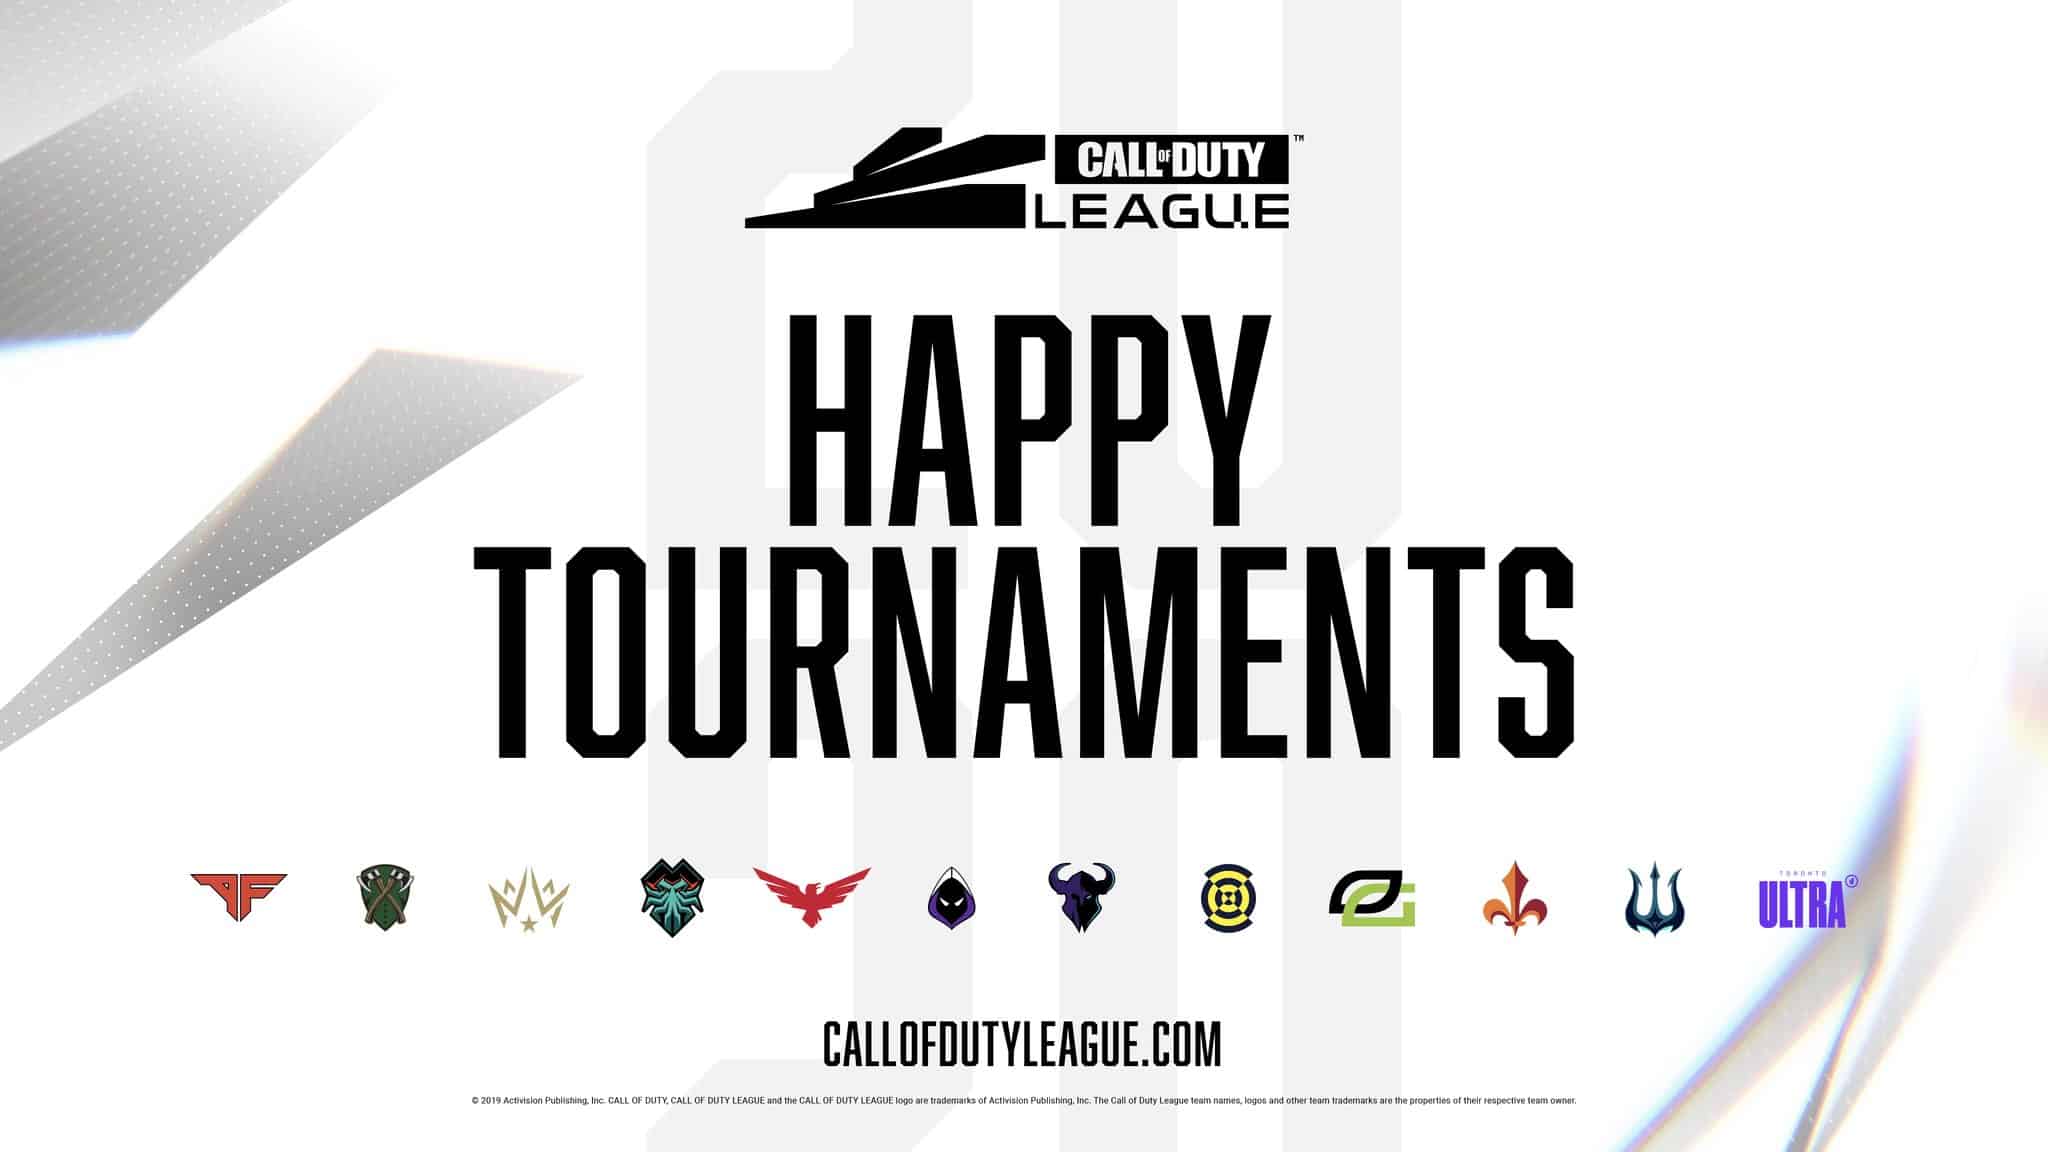 Call of Duty League announces Pro Tournament structure is returning for 2020 season